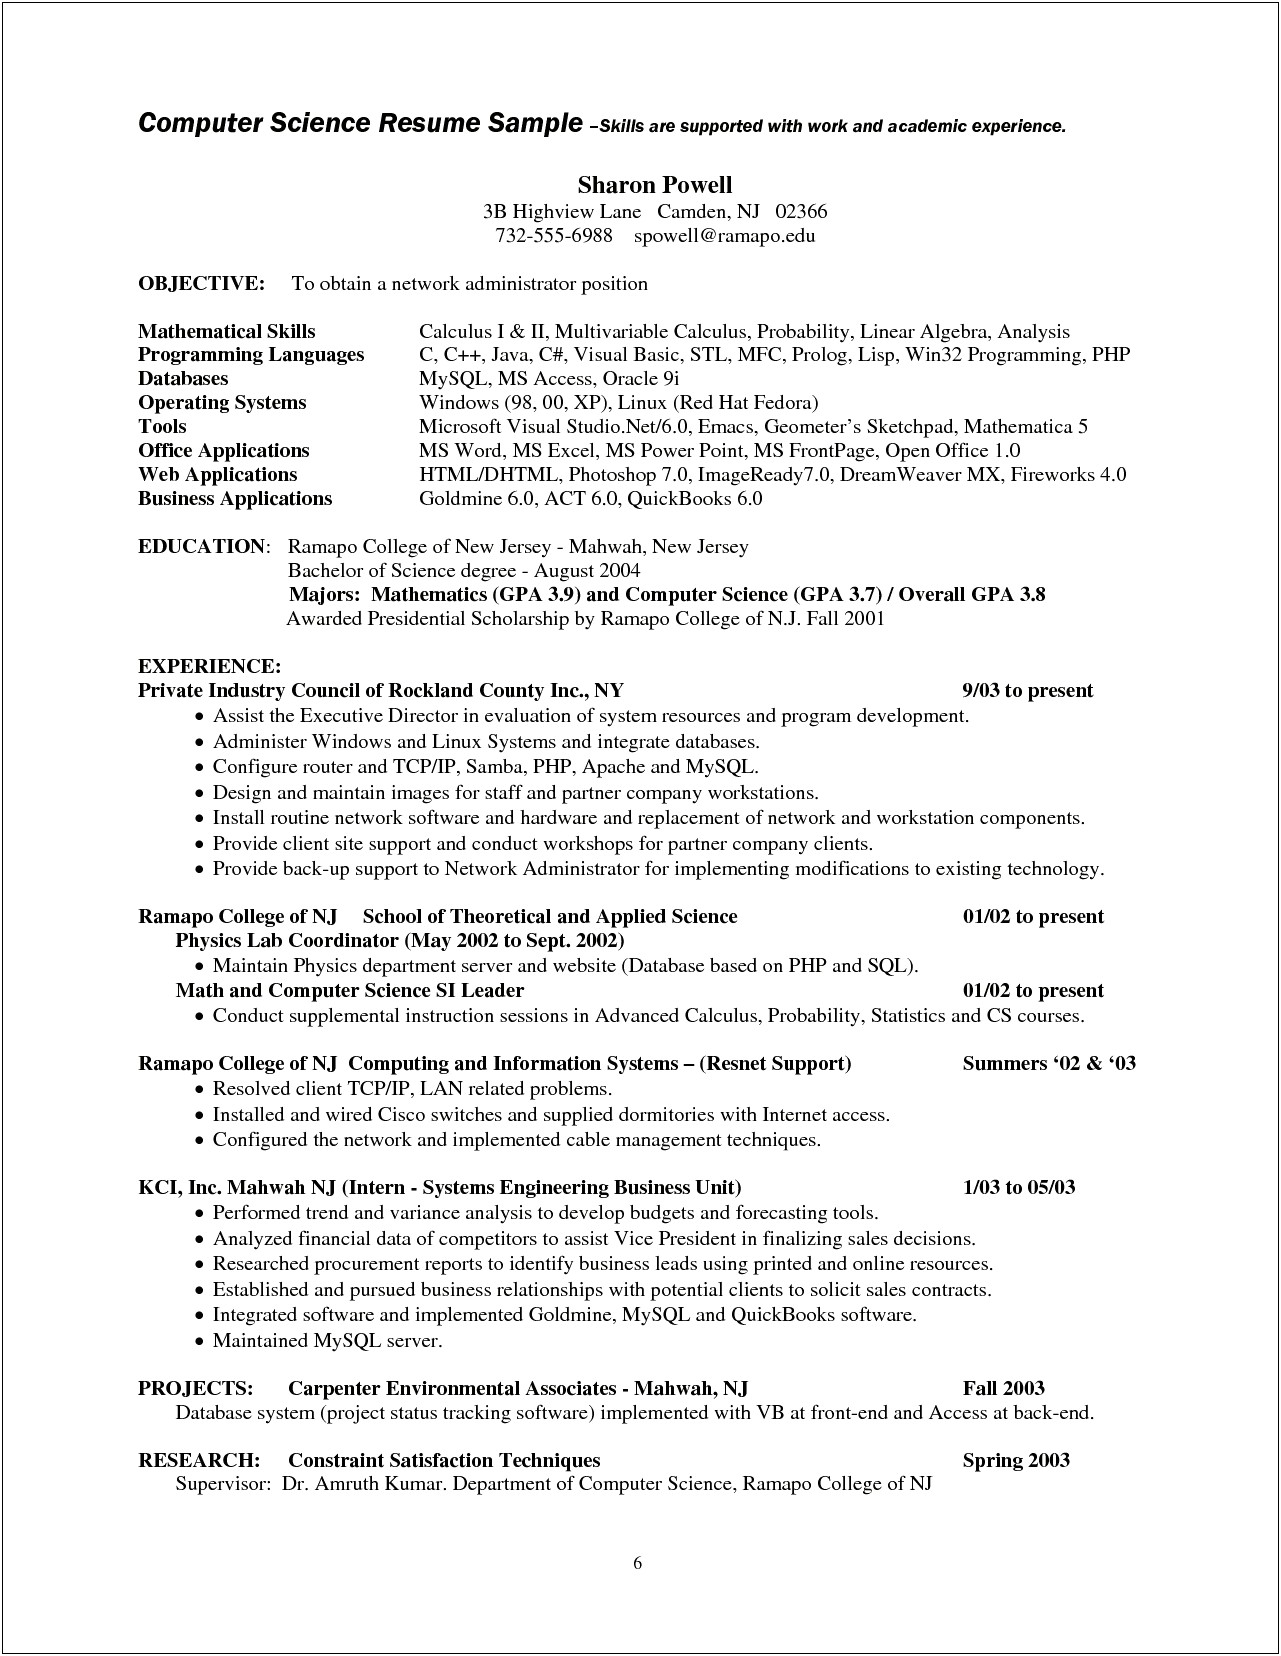 Computer Skills Section On Resume